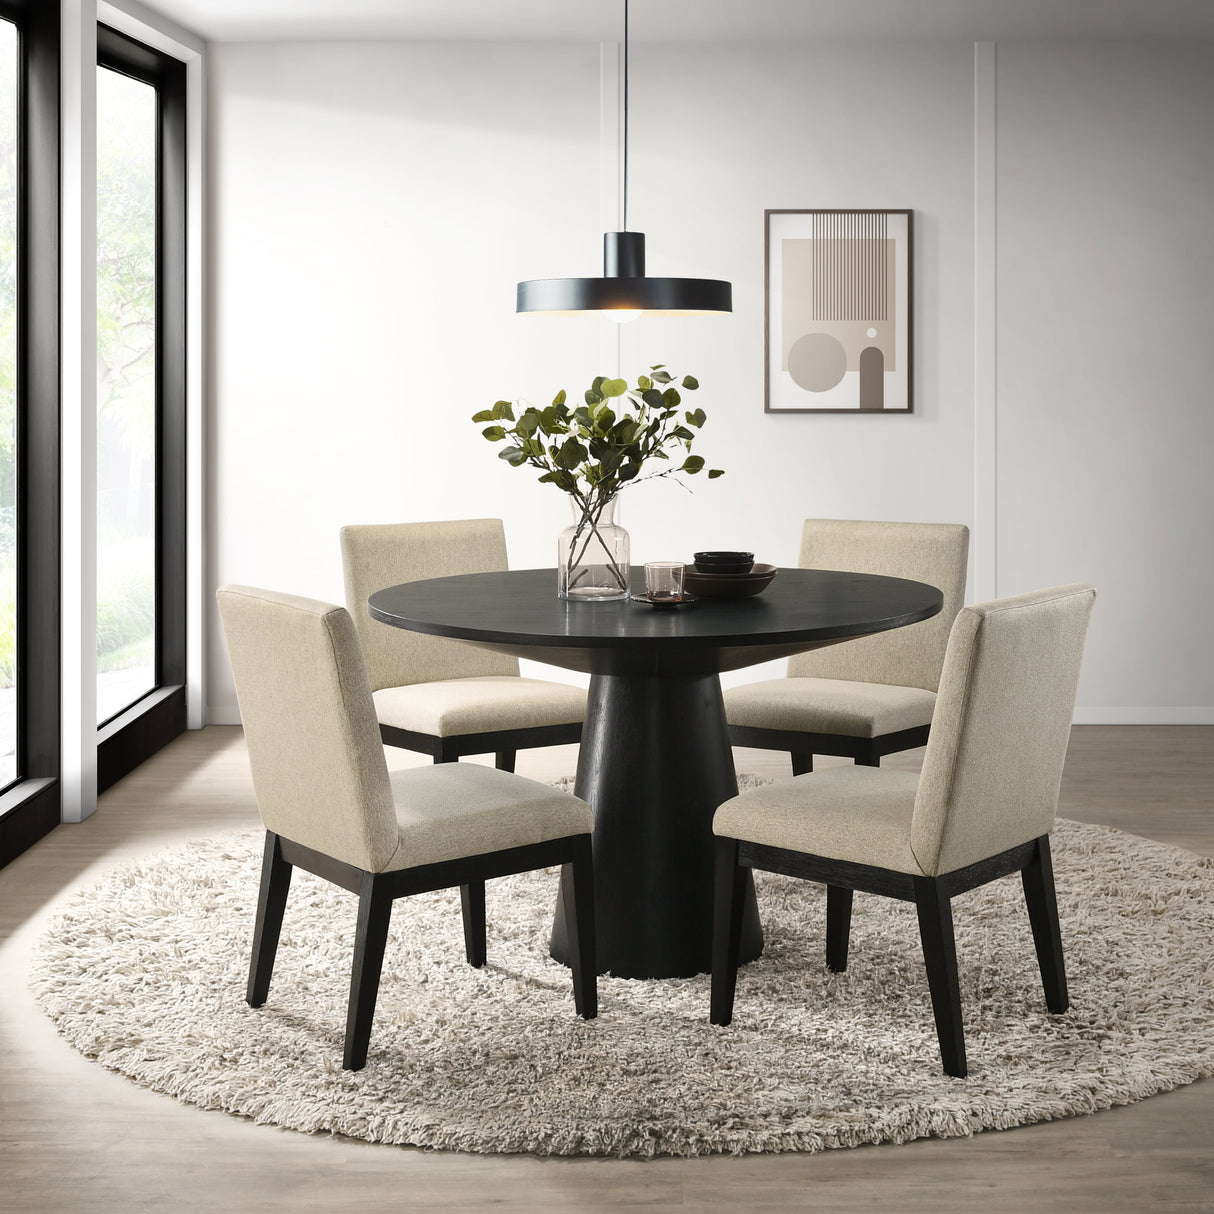 Roundhill Furniture Rocco Contemporary Wood Dining Set, round Pedestal Table with 4 Chairs, Ebony